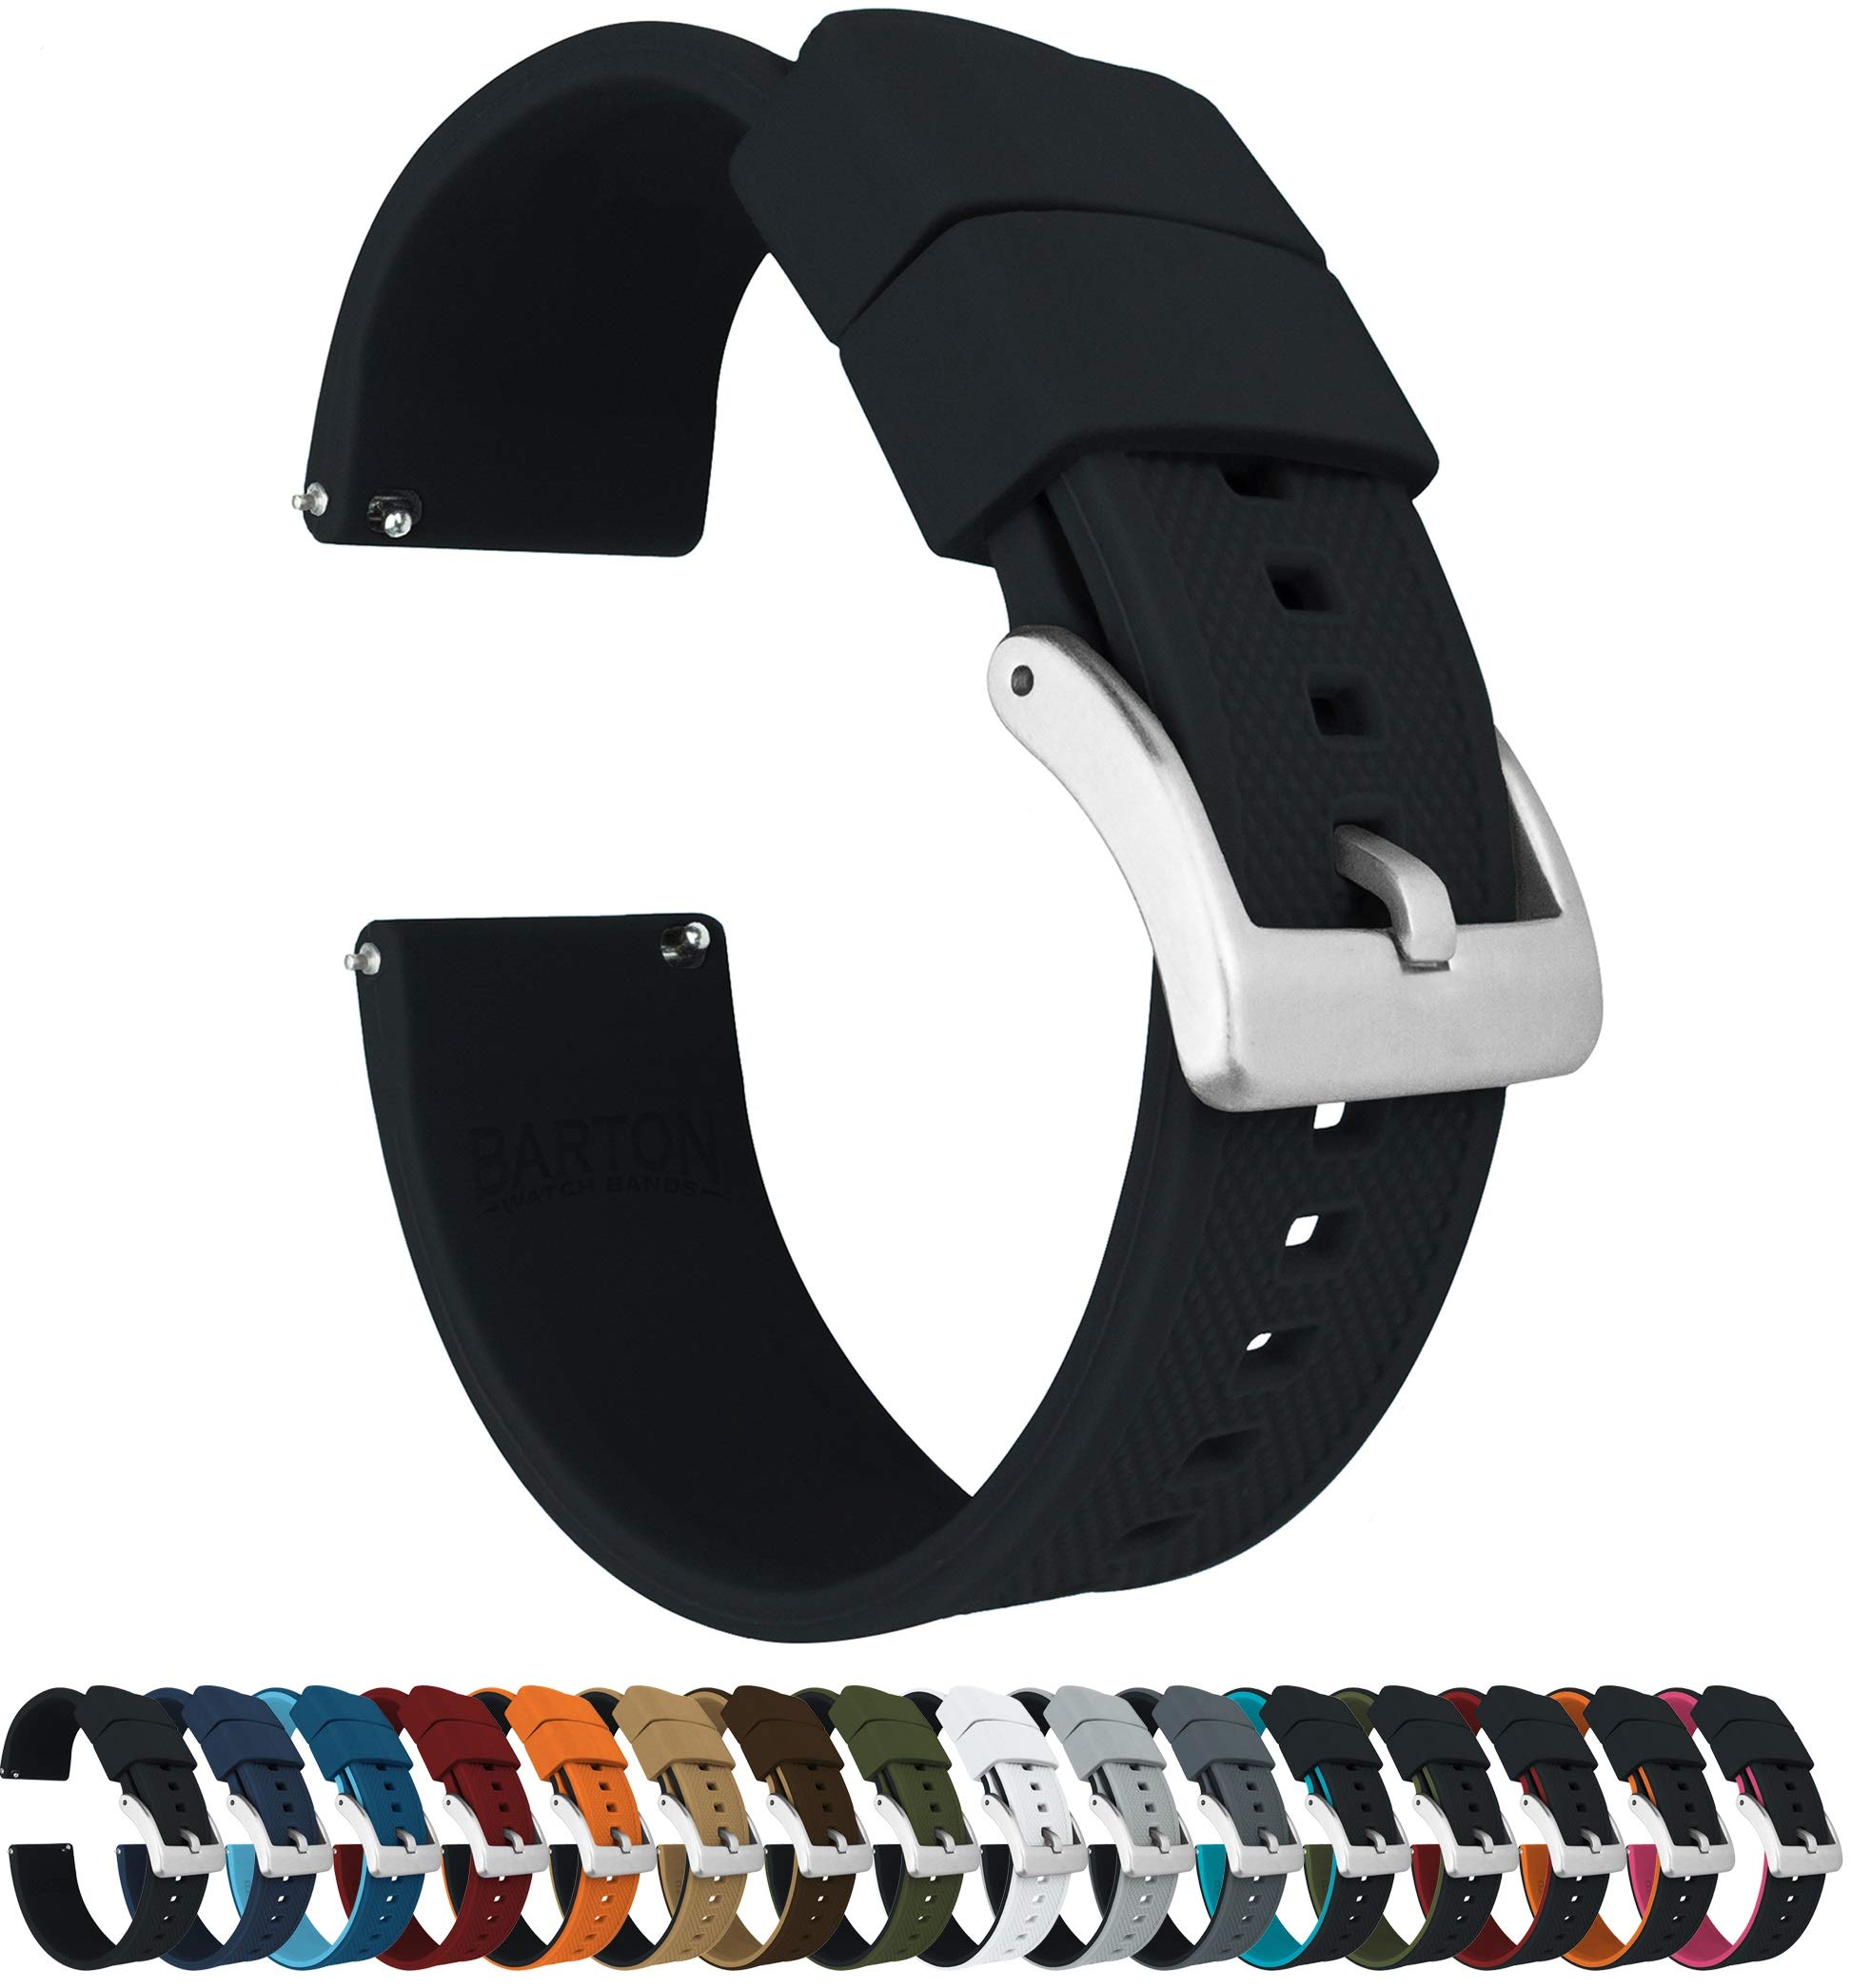 BARTON Elite Silicone Watch Bands - Quick Release - Choose Strap Color & Buckle Color (Stainless Steel, Black PVD or Gunmetal Grey) - 18mm, 20mm, 22mm & 24mm Watch Straps